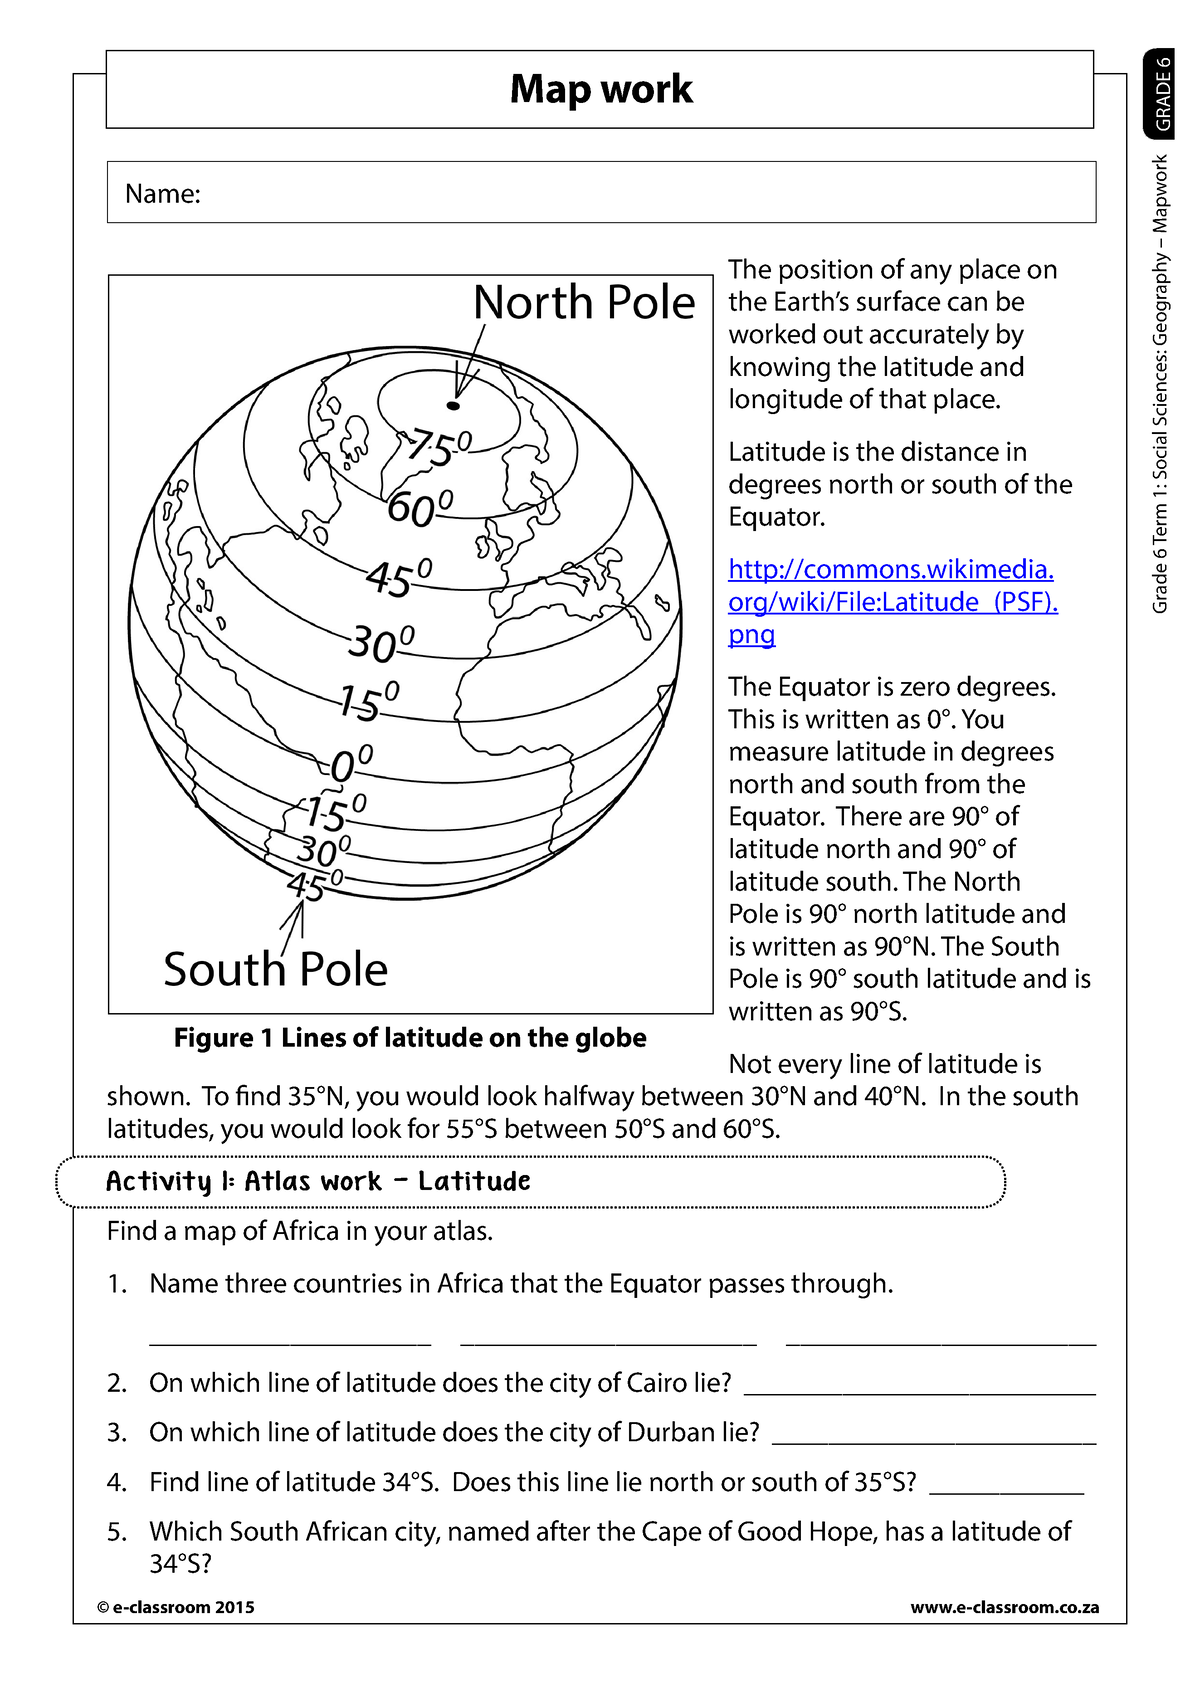 class 6 geography case study questions